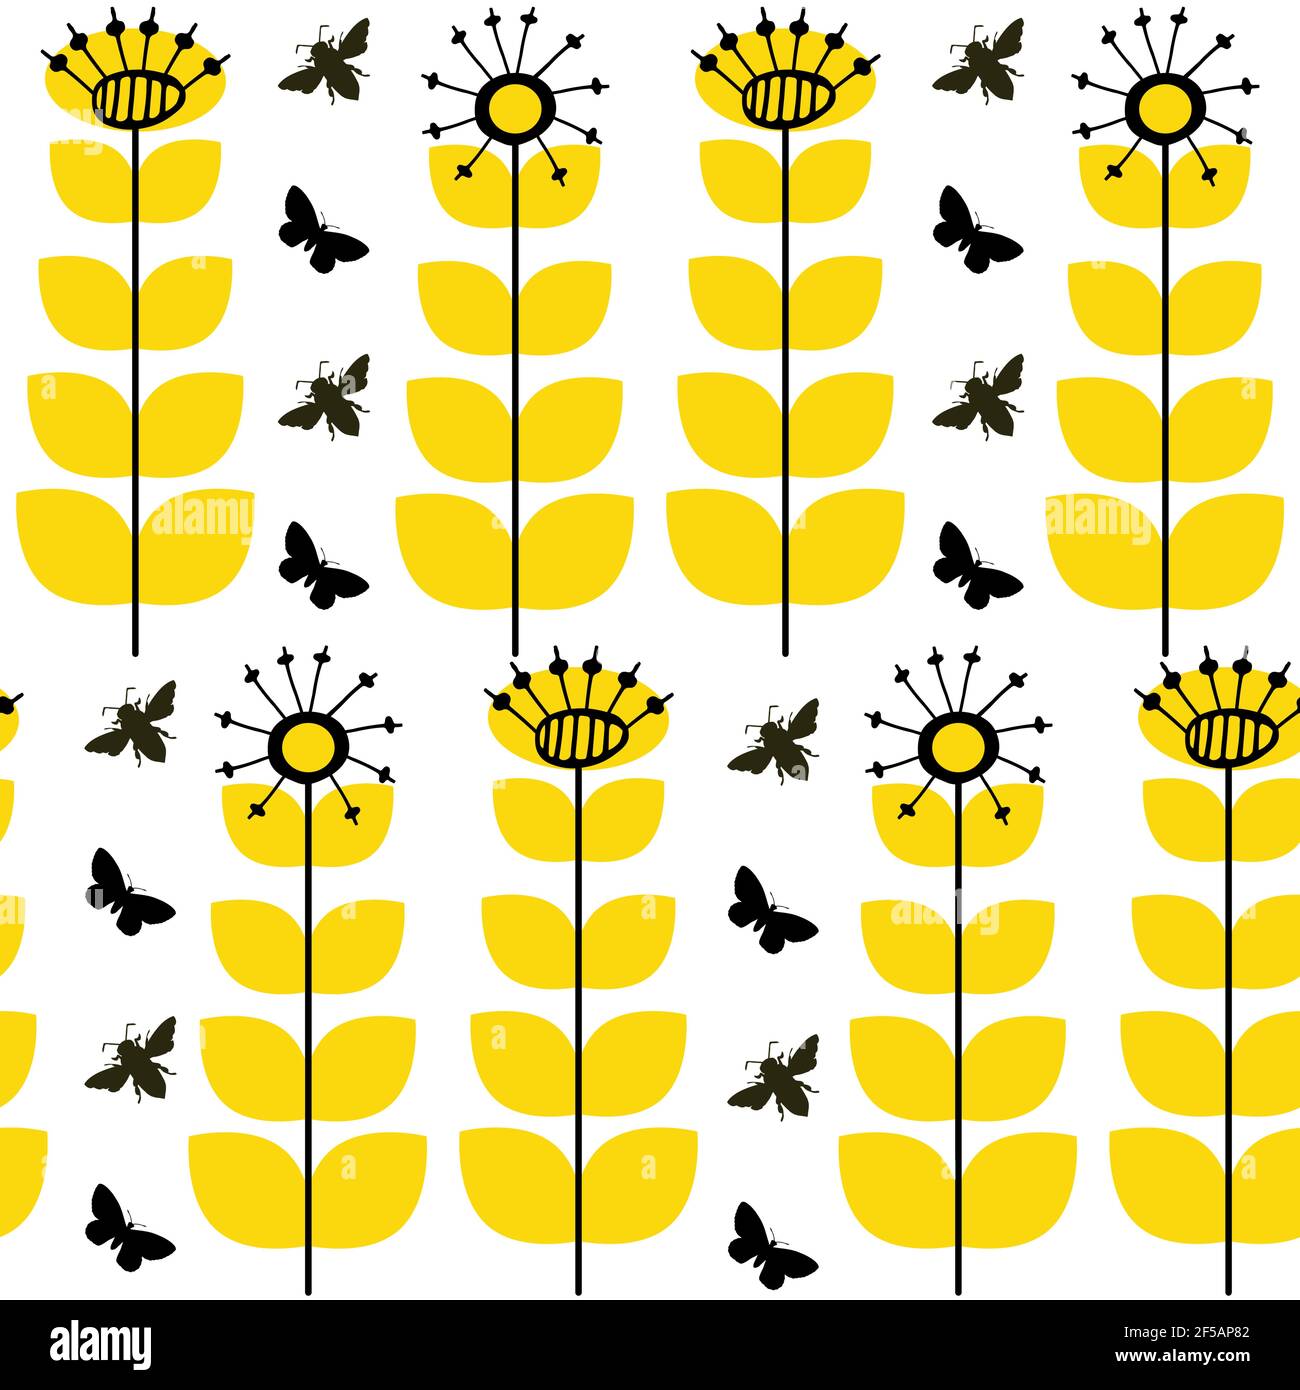 Abstract dandelion seed and honey bees seamless vector pattern background.Stylized folk art mix of herbacious flowers and insects yellow white black Stock Vector